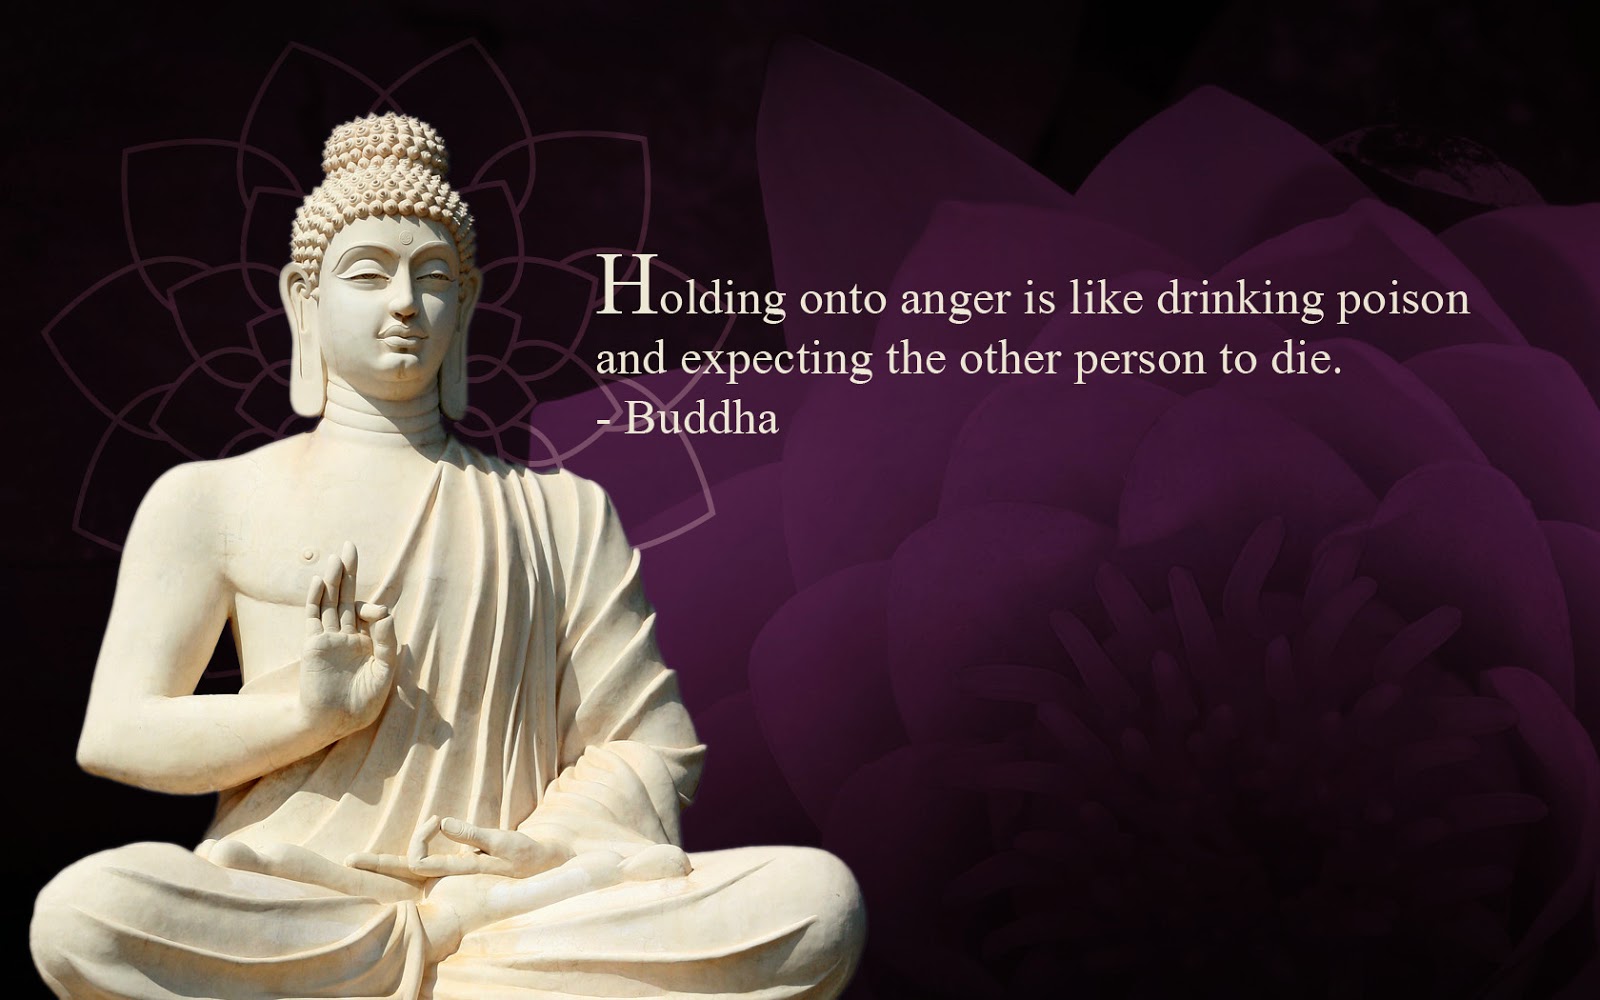 Free Download Buddha Wallpapers With Quotes On Life And Happiness Hd Pictures For 1600x1000 For Your Desktop Mobile Tablet Explore 78 Buddhist Wallpaper Free Buddhist Wallpaper And Screensavers Buddhist